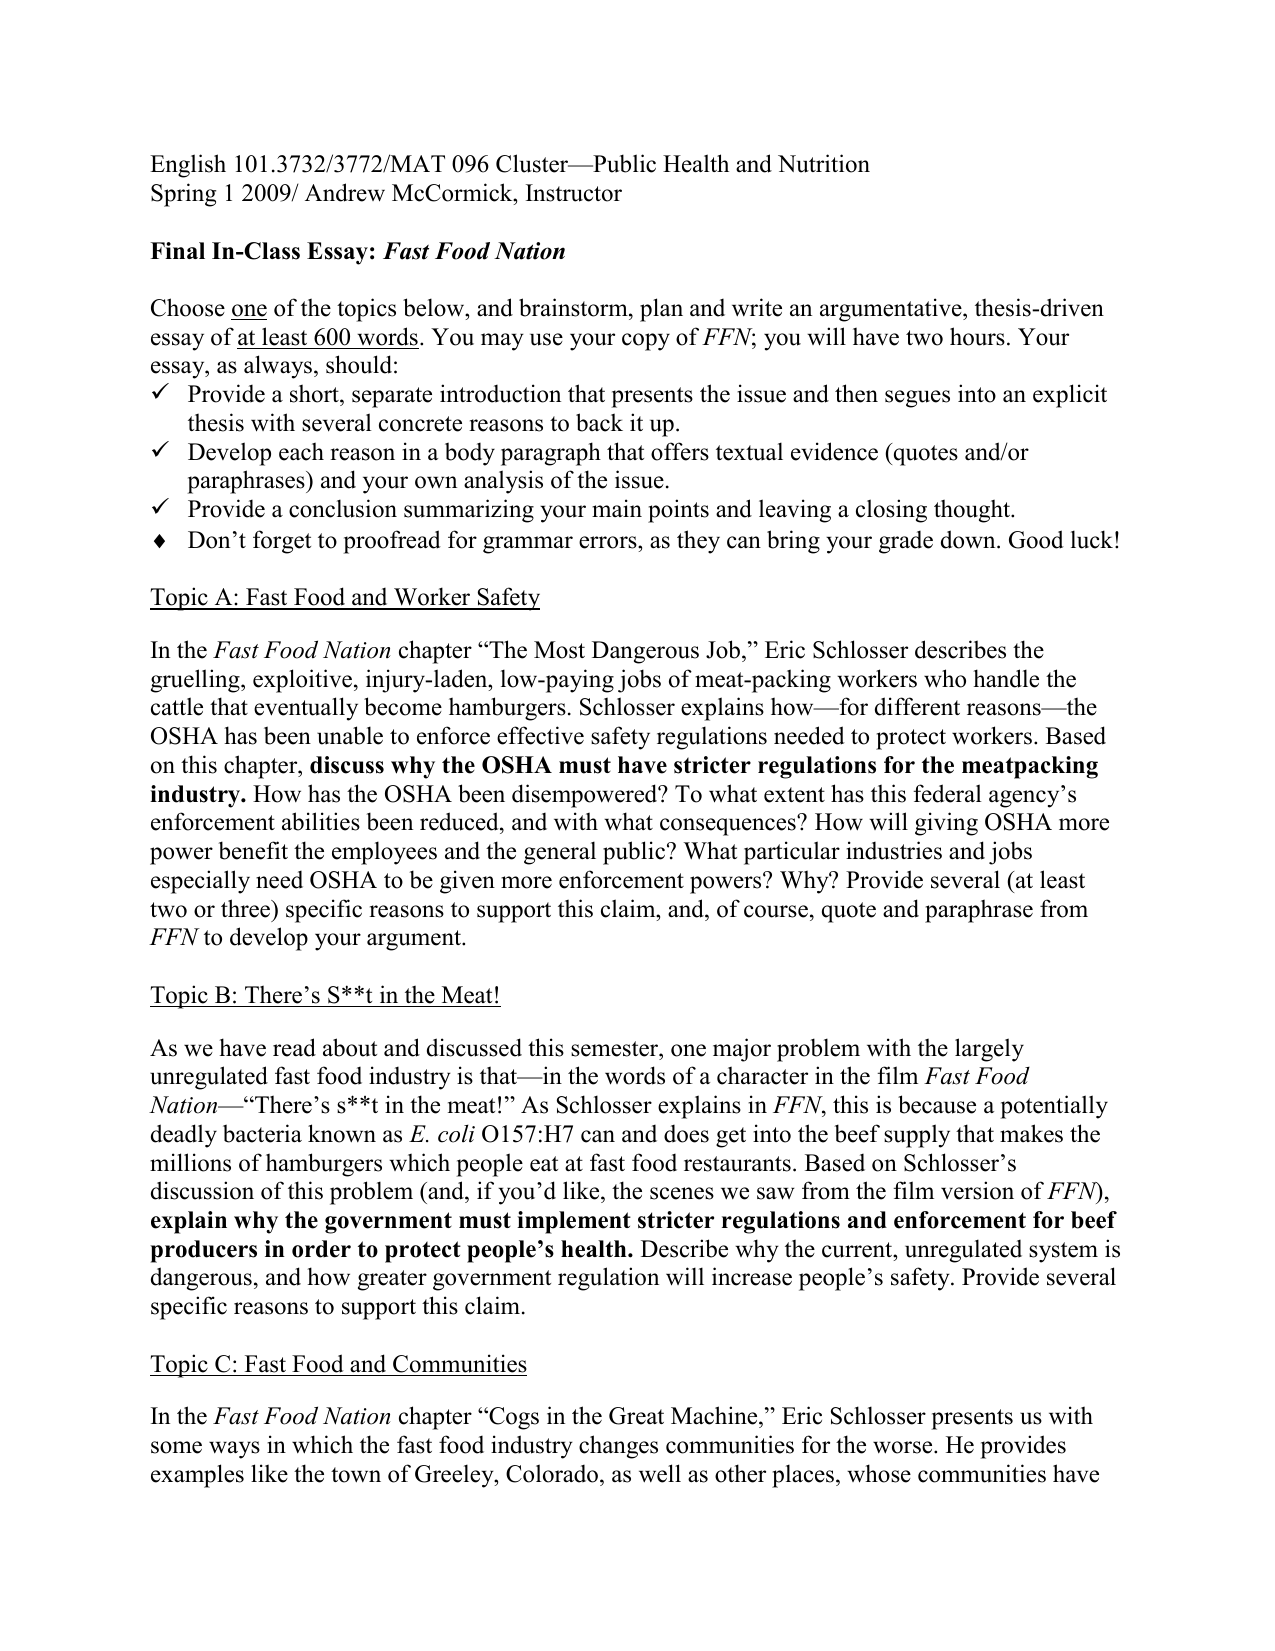 Fast Food Nation Essay Example | Topics and Well Written Essays - words